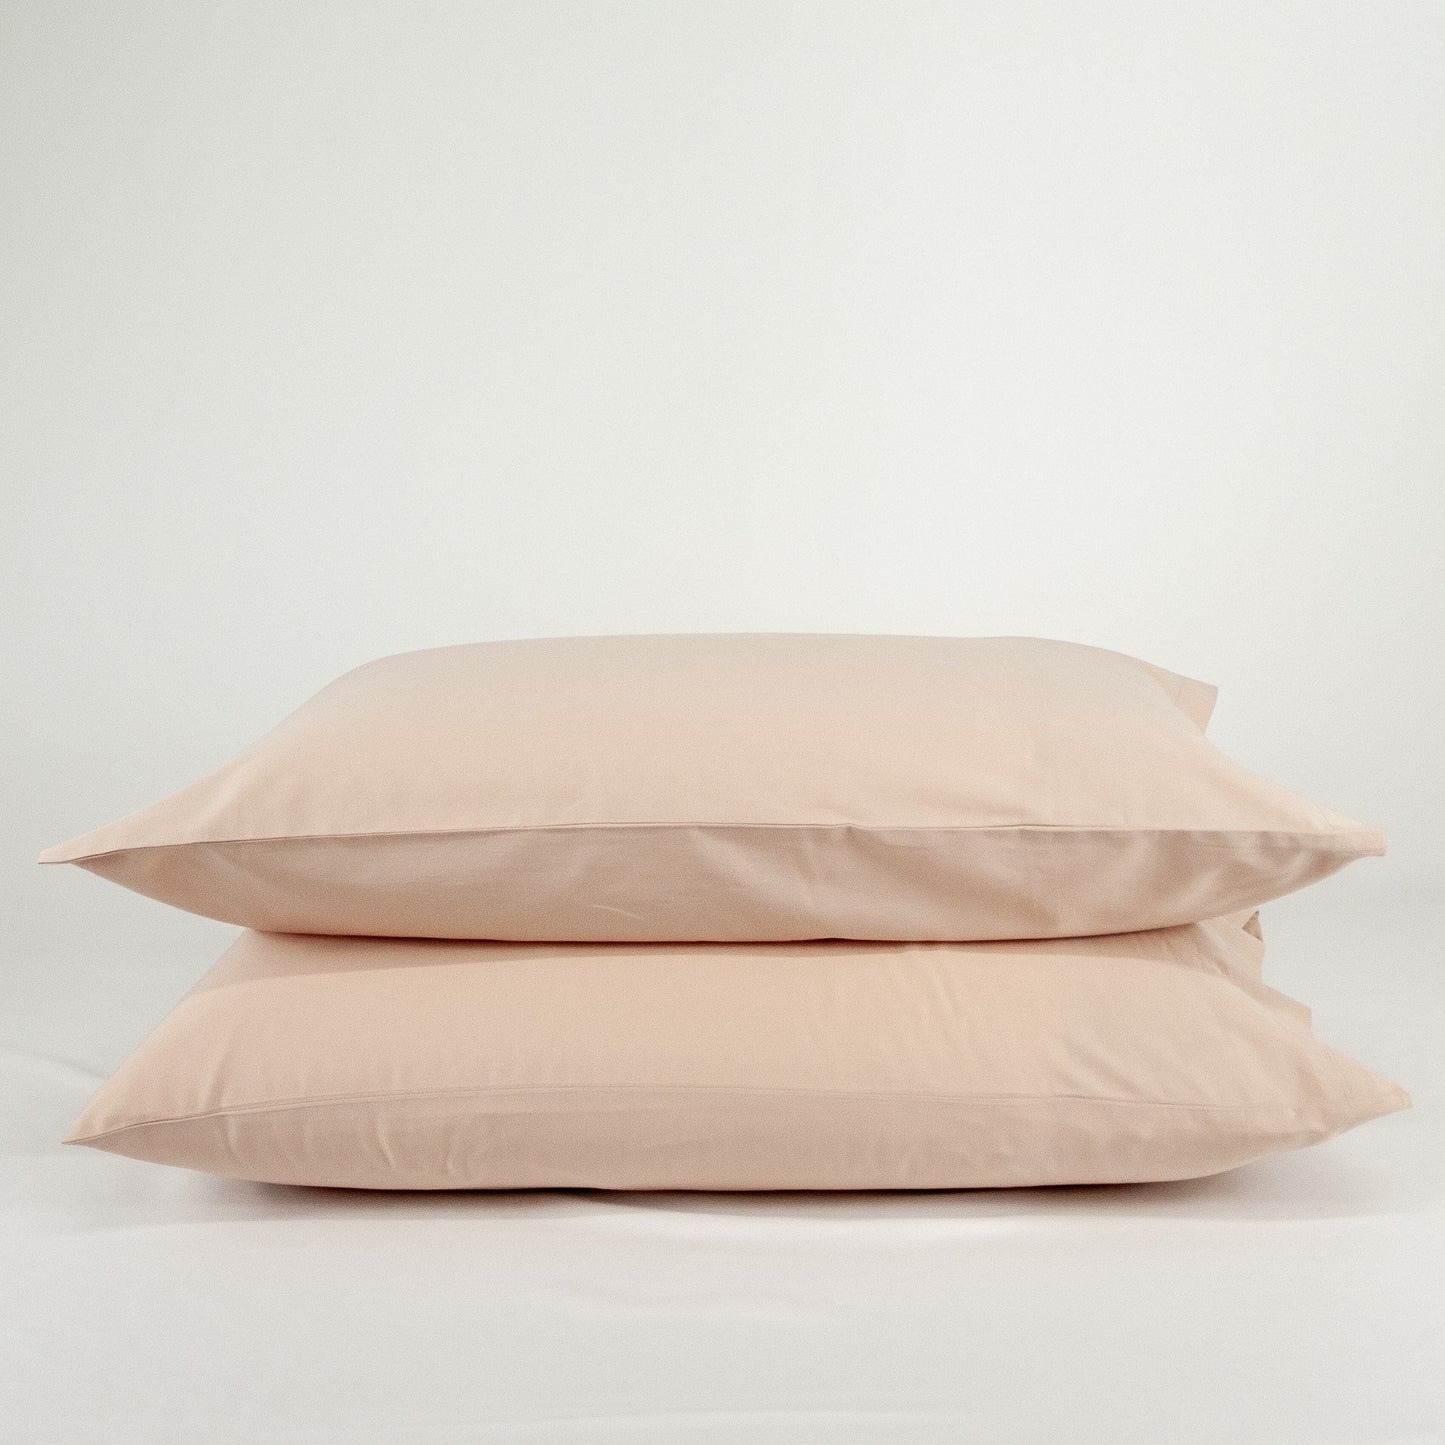 Stacked organic cotton pillowcases in blush pink